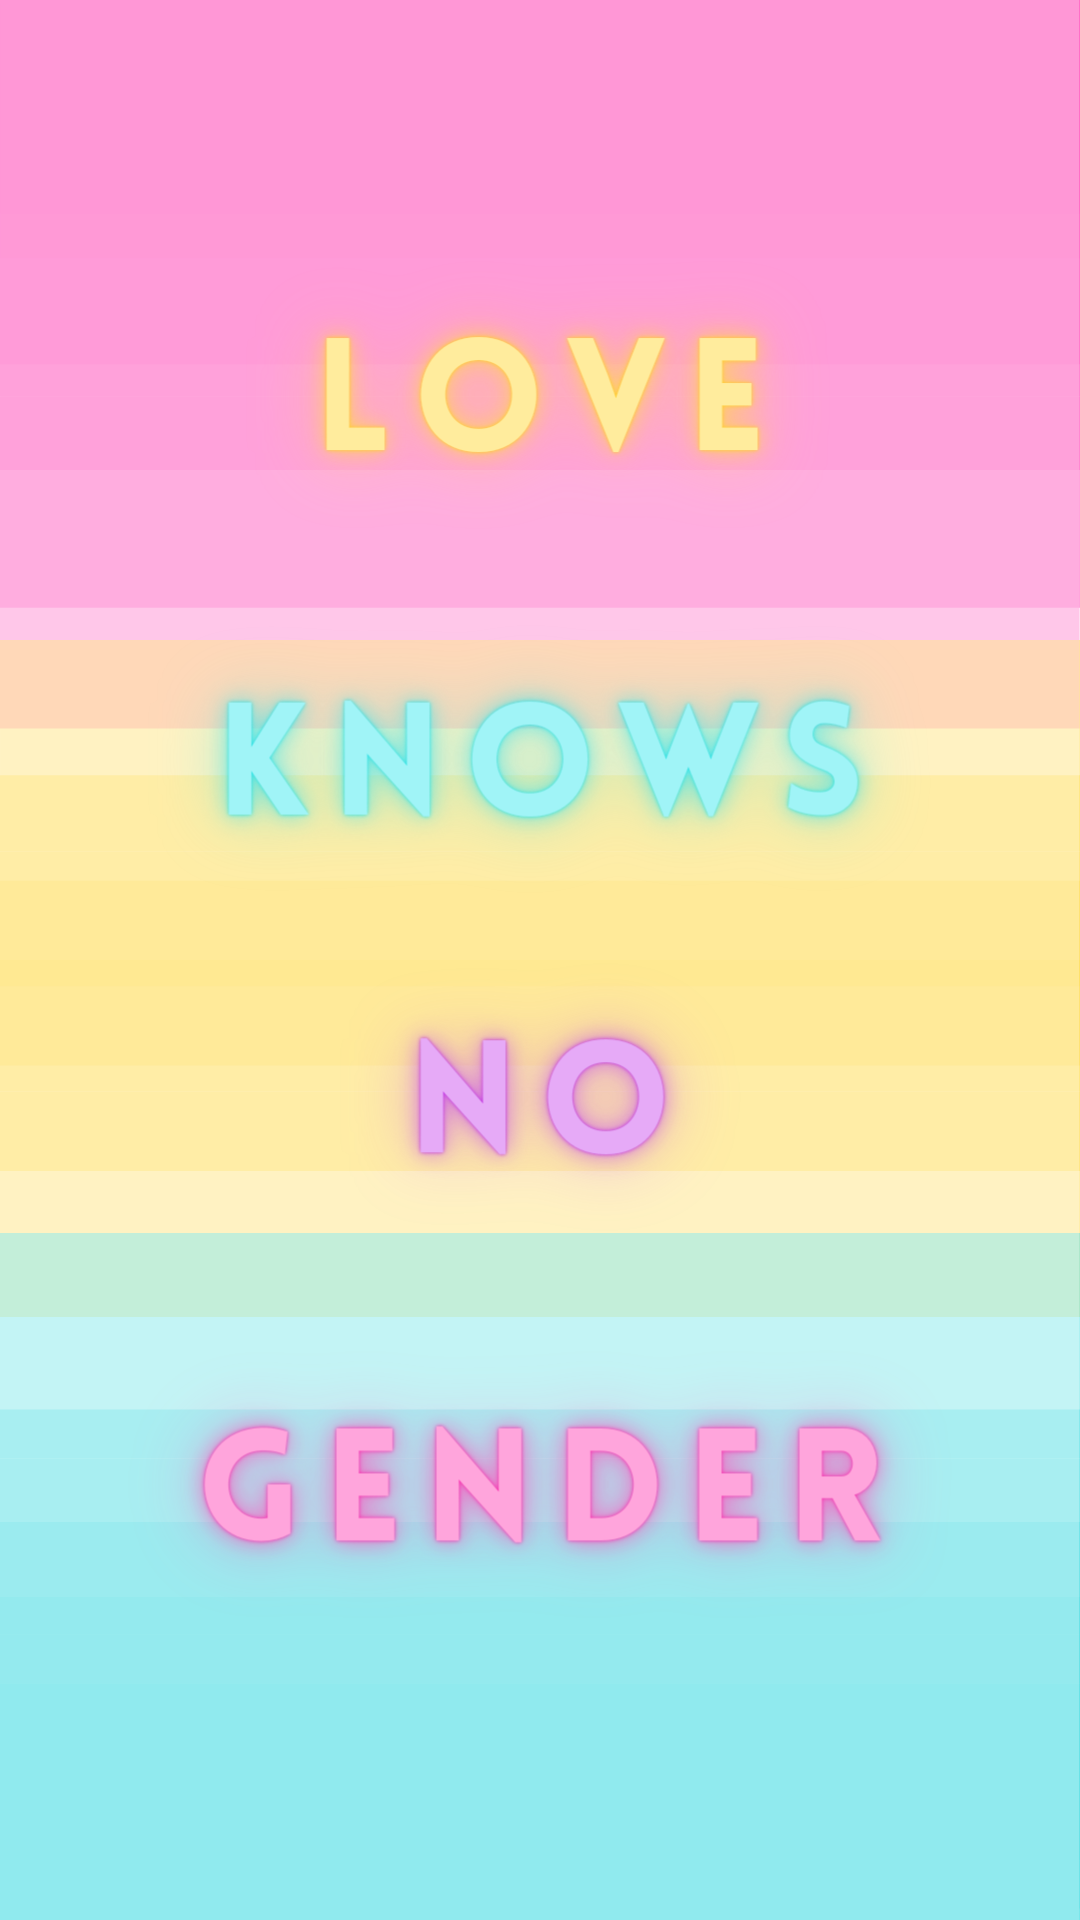 Cute Phone Wallpaper I've Made For Friends And Self. Pansexual, Transgender, Genderfluid And Non Binary. Help Yourselves. Xo: Lgbt